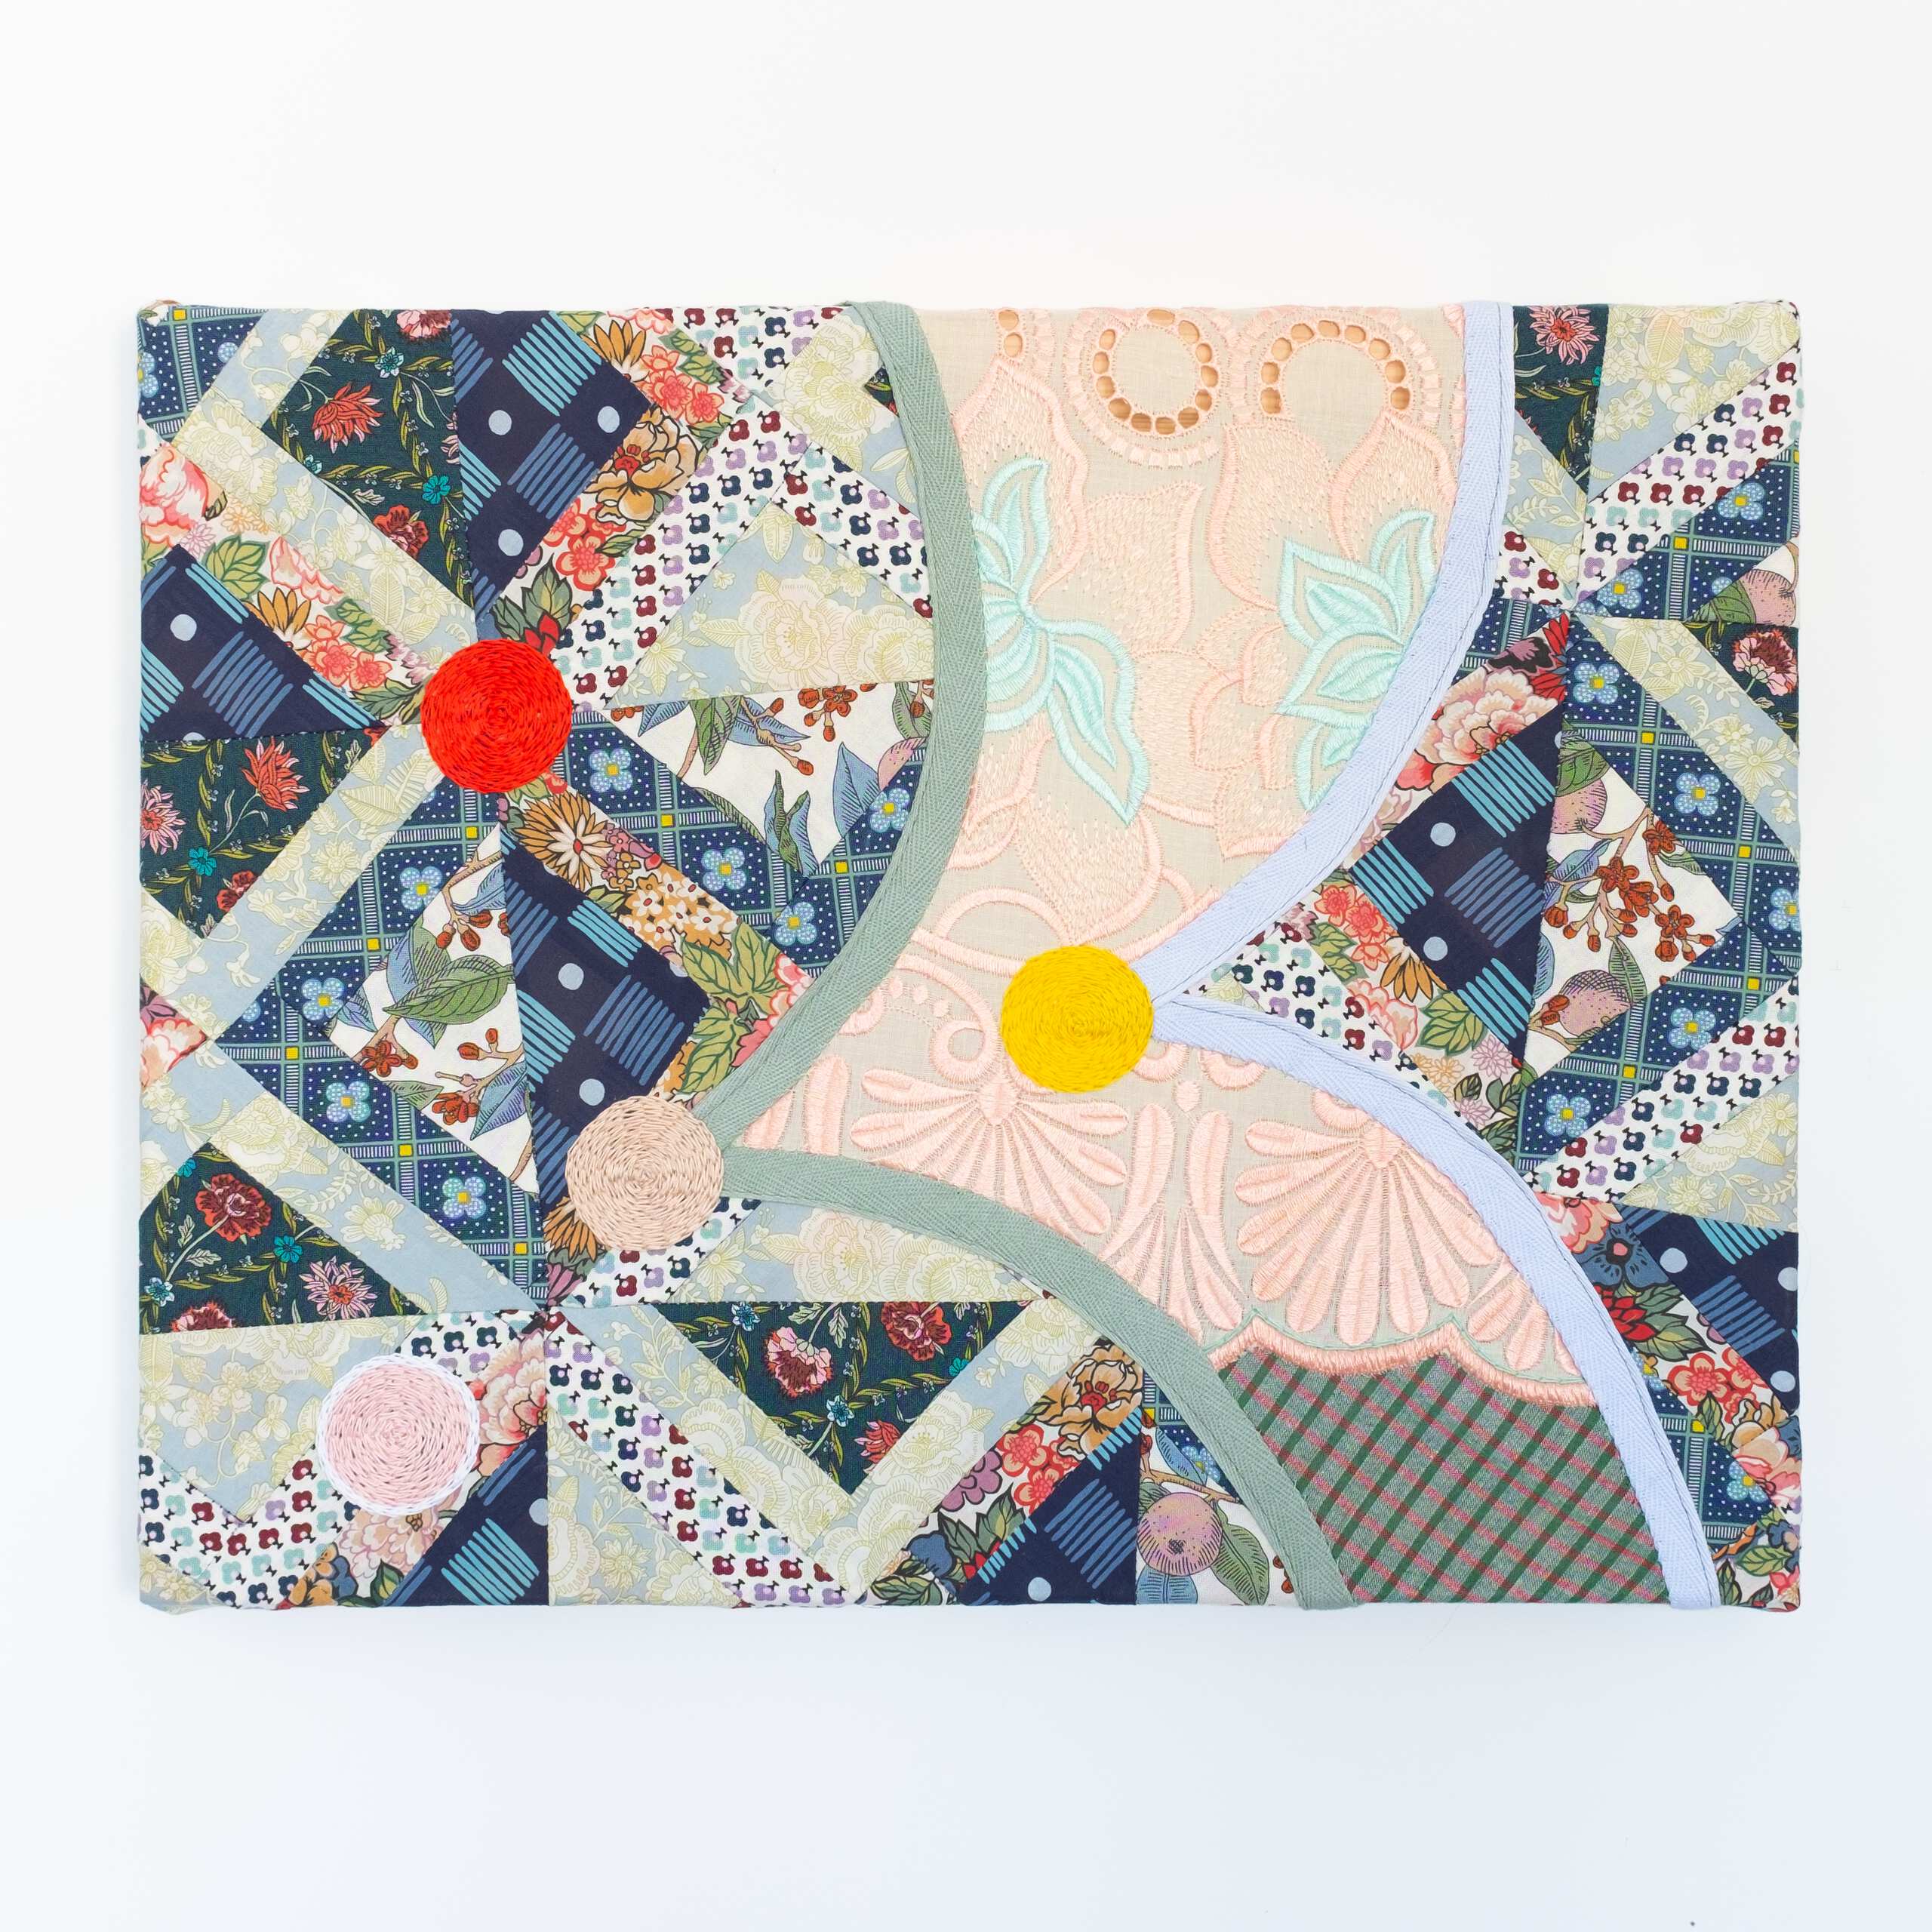 Quilted Composition (awkward painting 2), Sewn fabric, hand-embroidered cotton thread, 2020